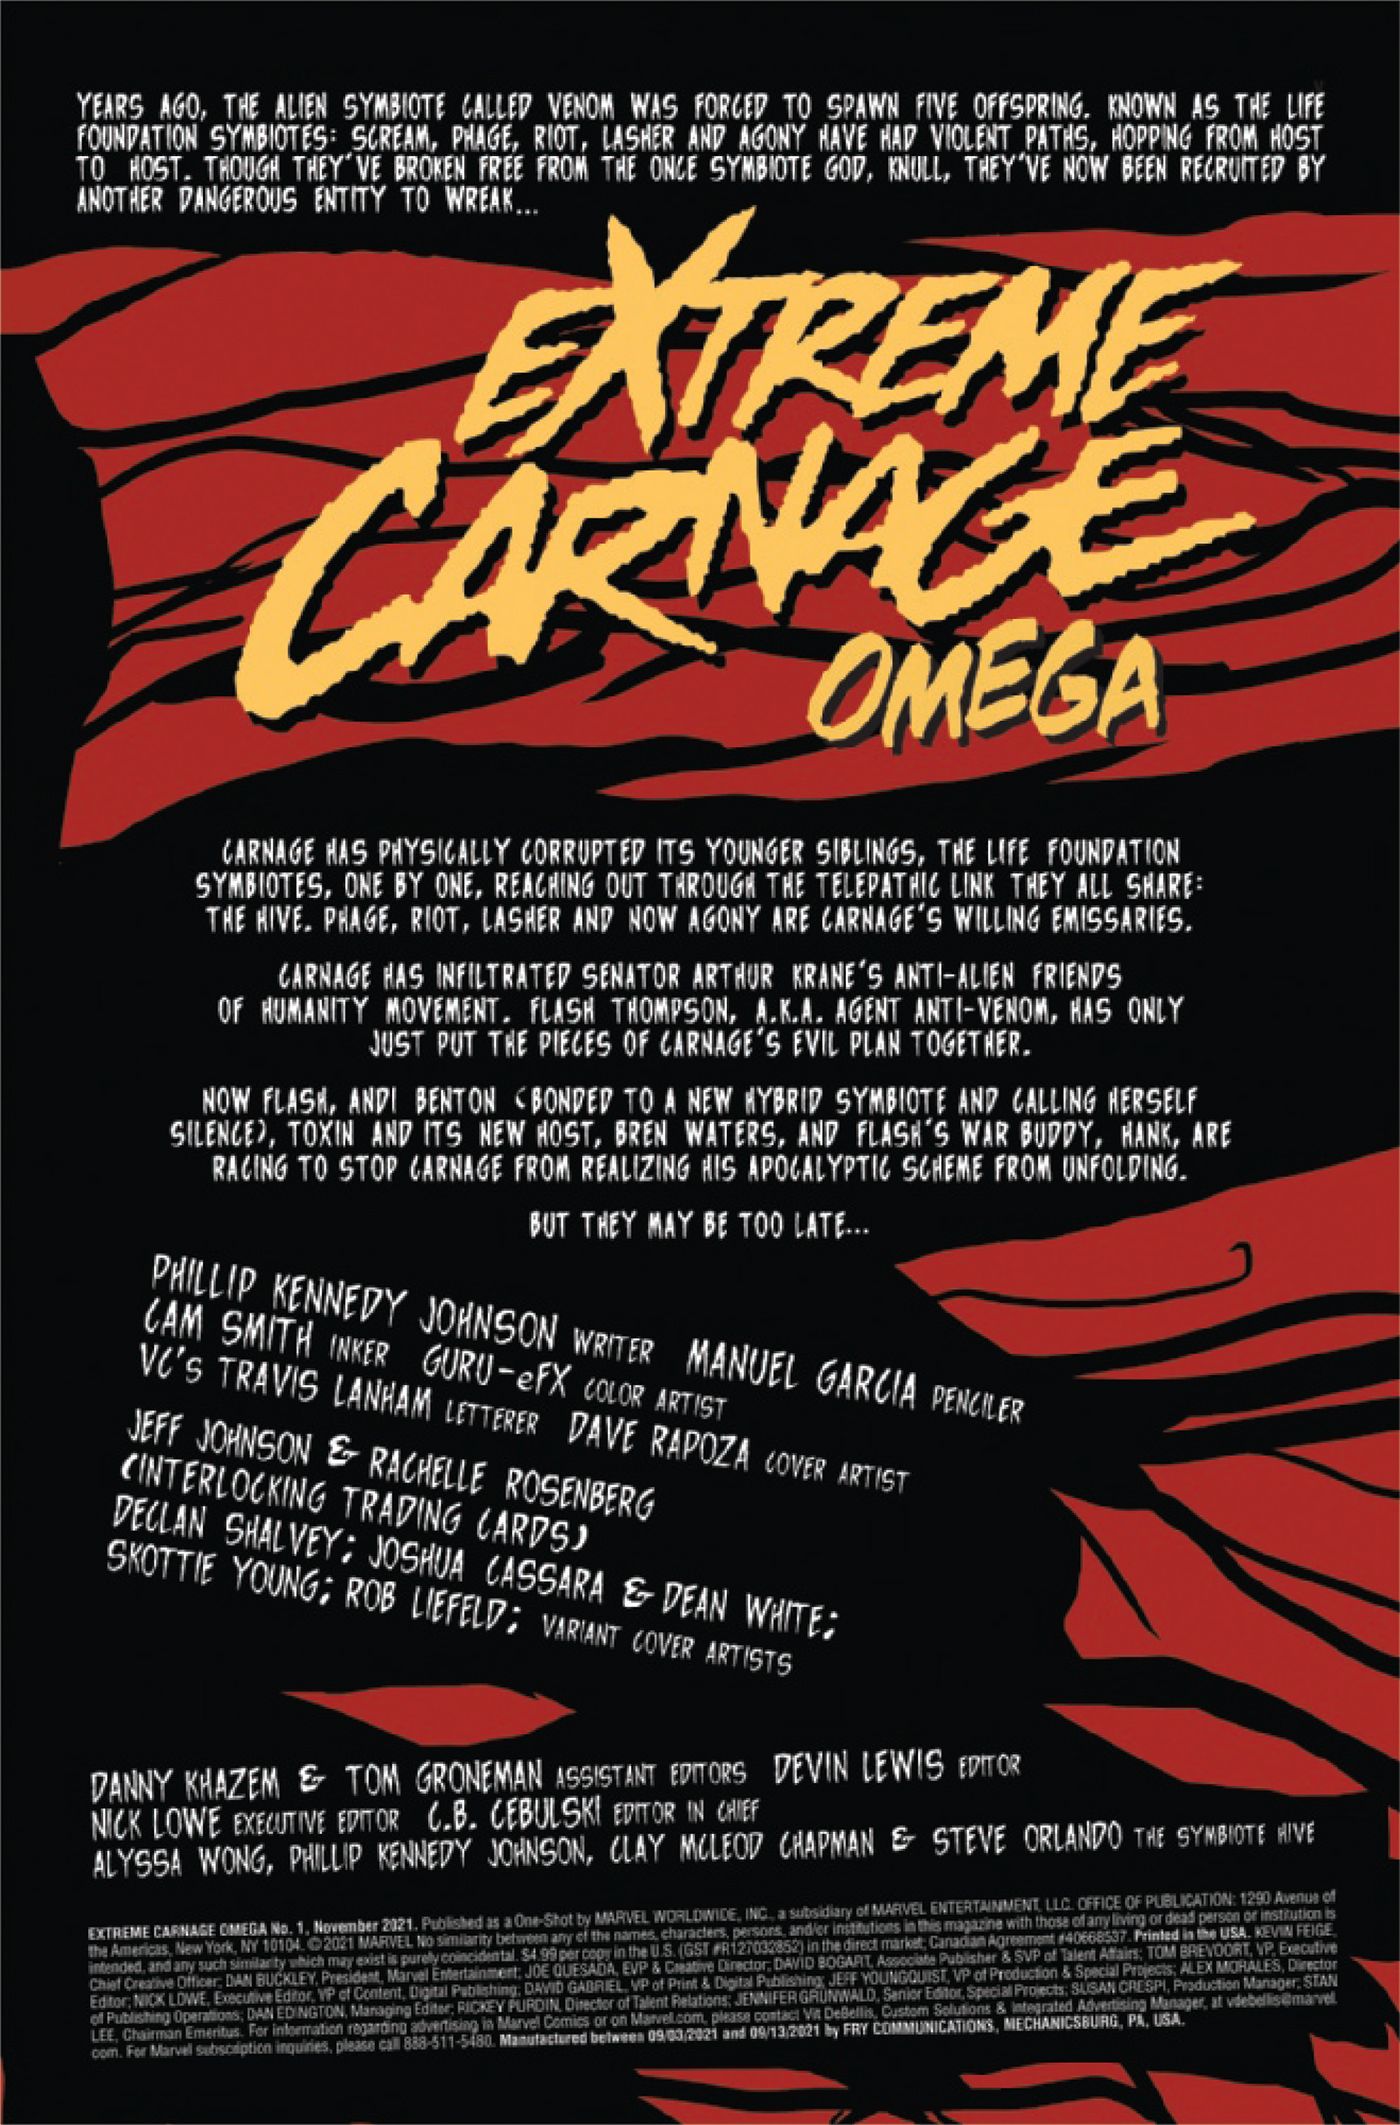 Extreme Carnage Omega #1 preview pages